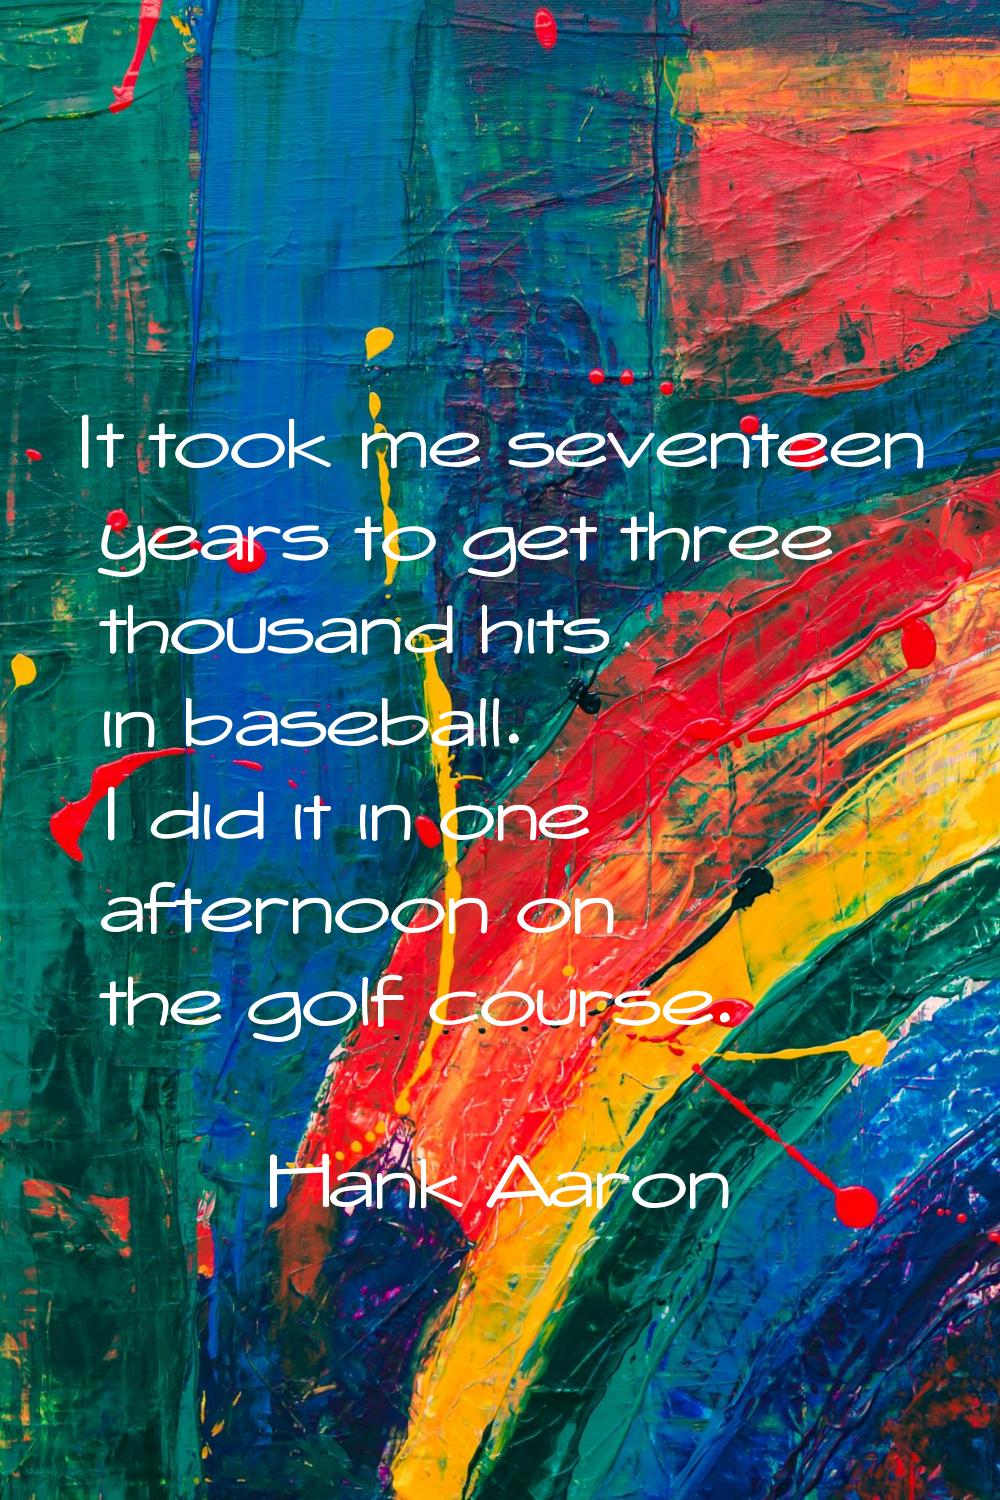 It took me seventeen years to get three thousand hits in baseball. I did it in one afternoon on the